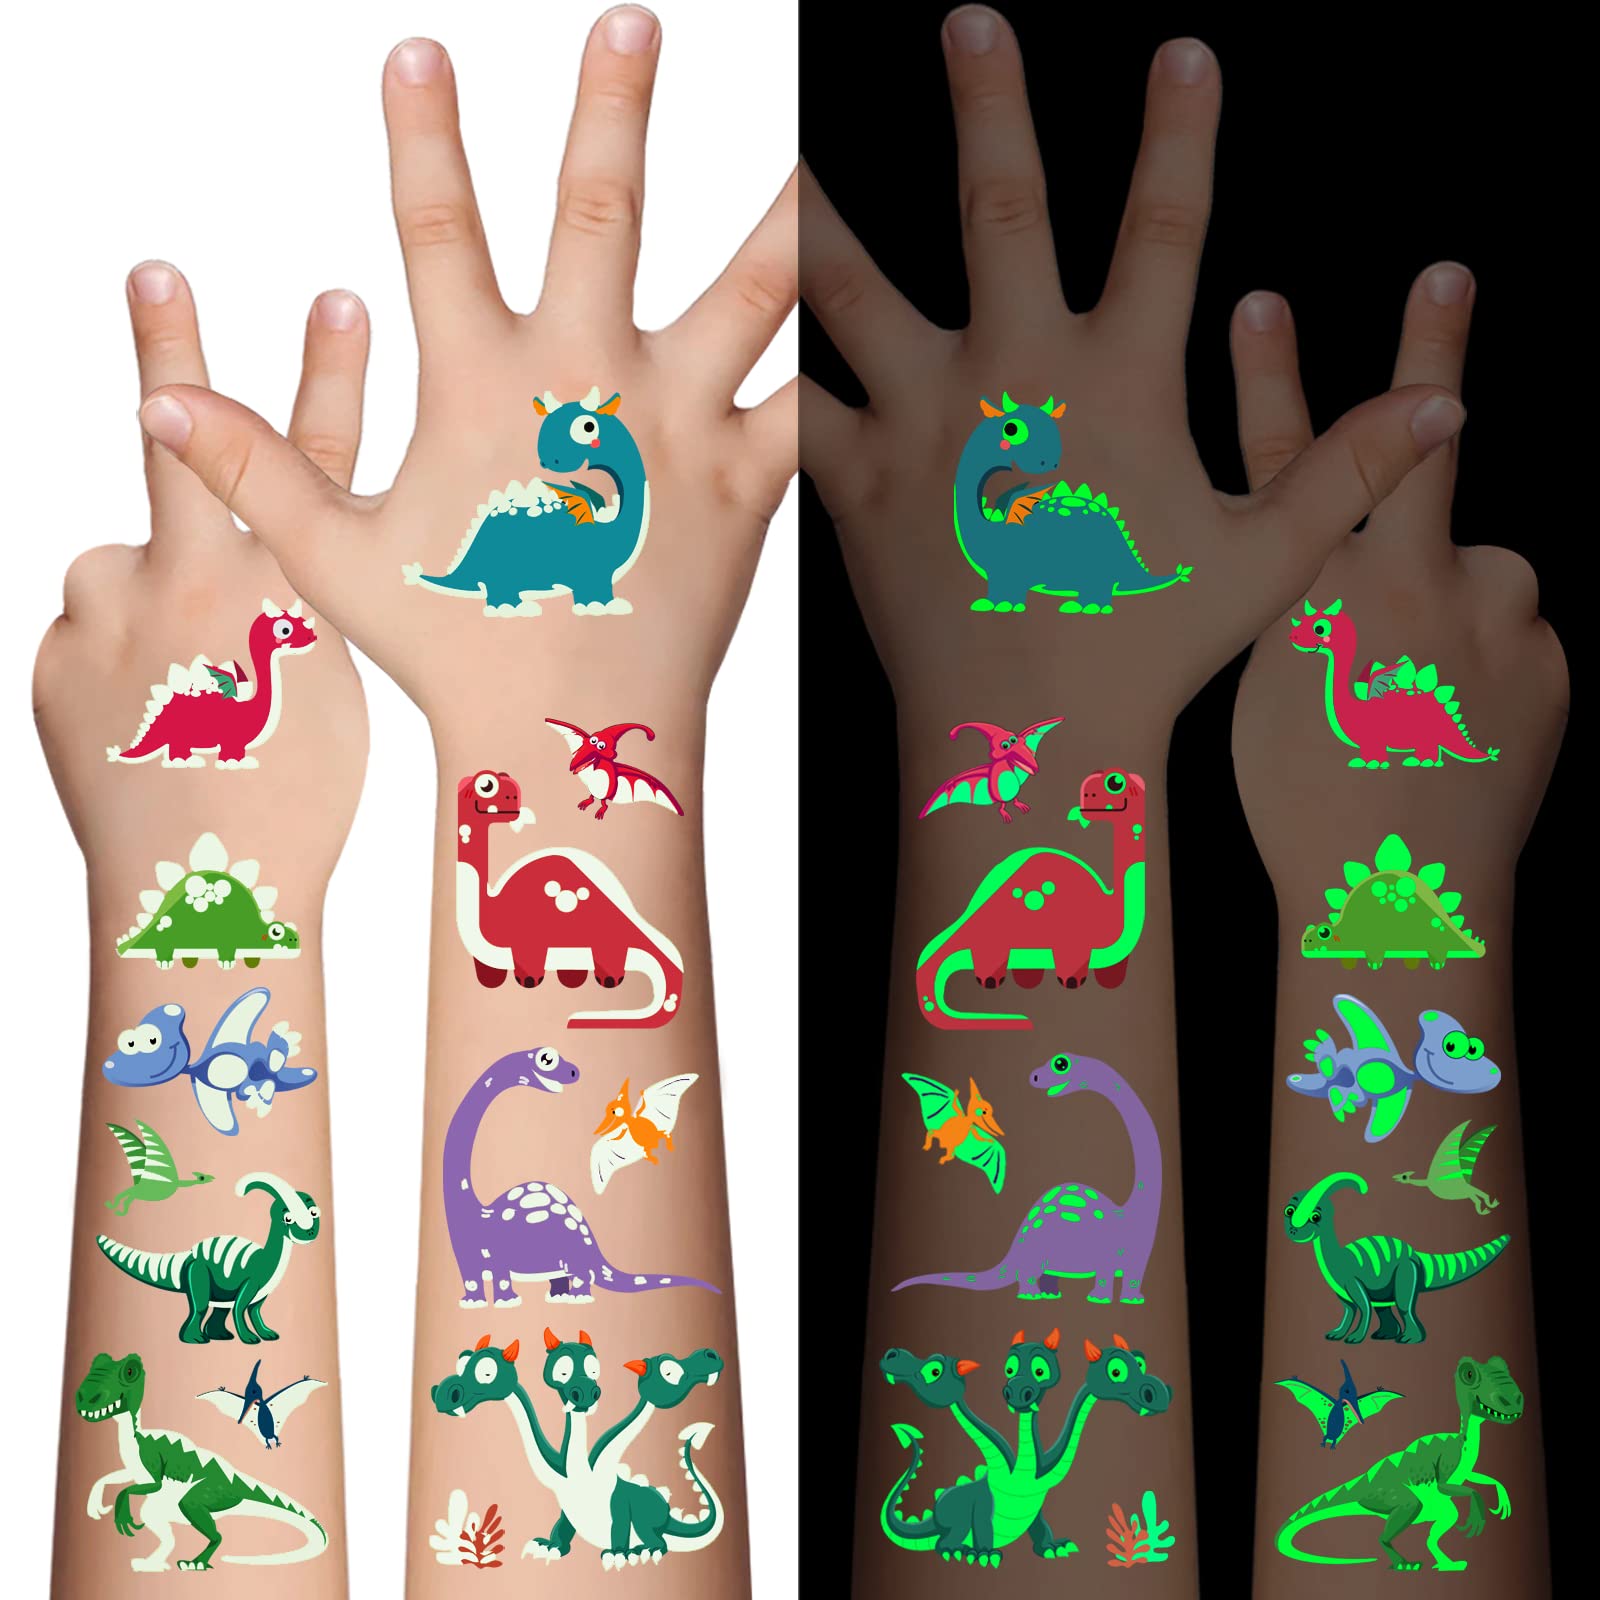 Amazon.com : AOMIG Temporary Tattoo for Kids, 10 Sheets Glow In The Dark  Cartoon Flower Fairy Tattoo Stickers, Waterproof Luminous Fake Tattoo  Stickers Set for Boys Girls Birthday Party Bag Filler :